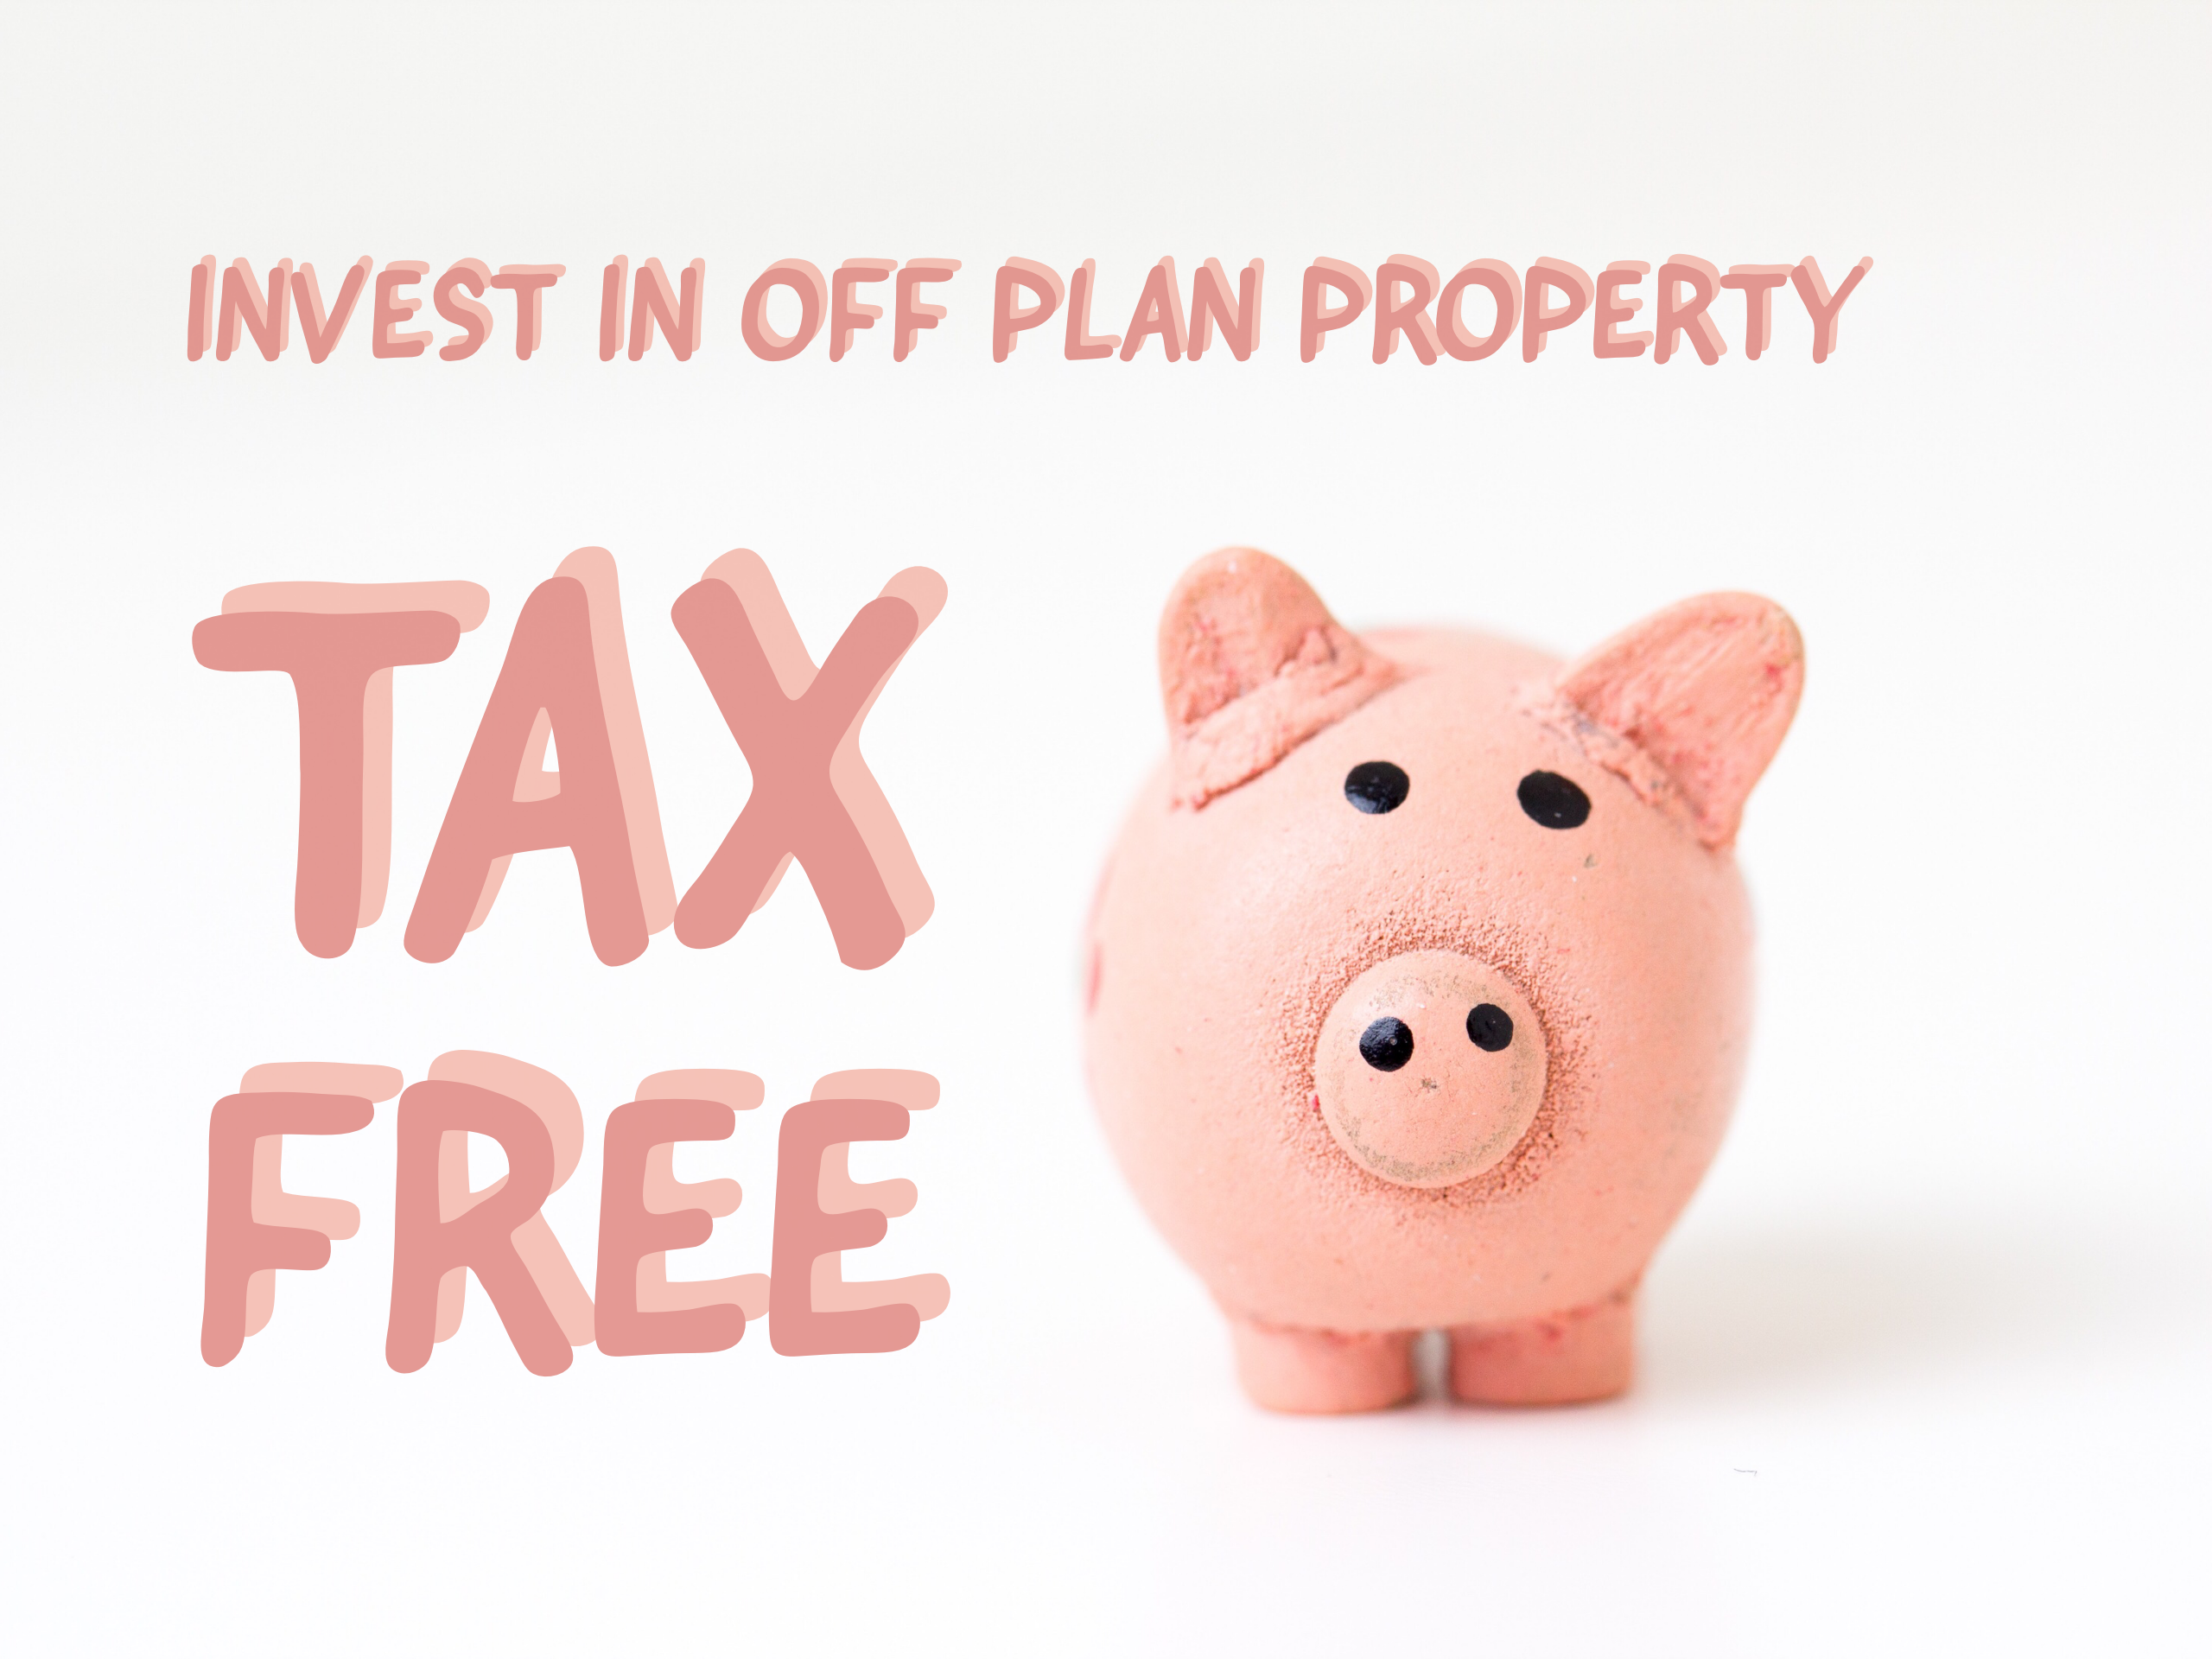 Tax free property investment Image